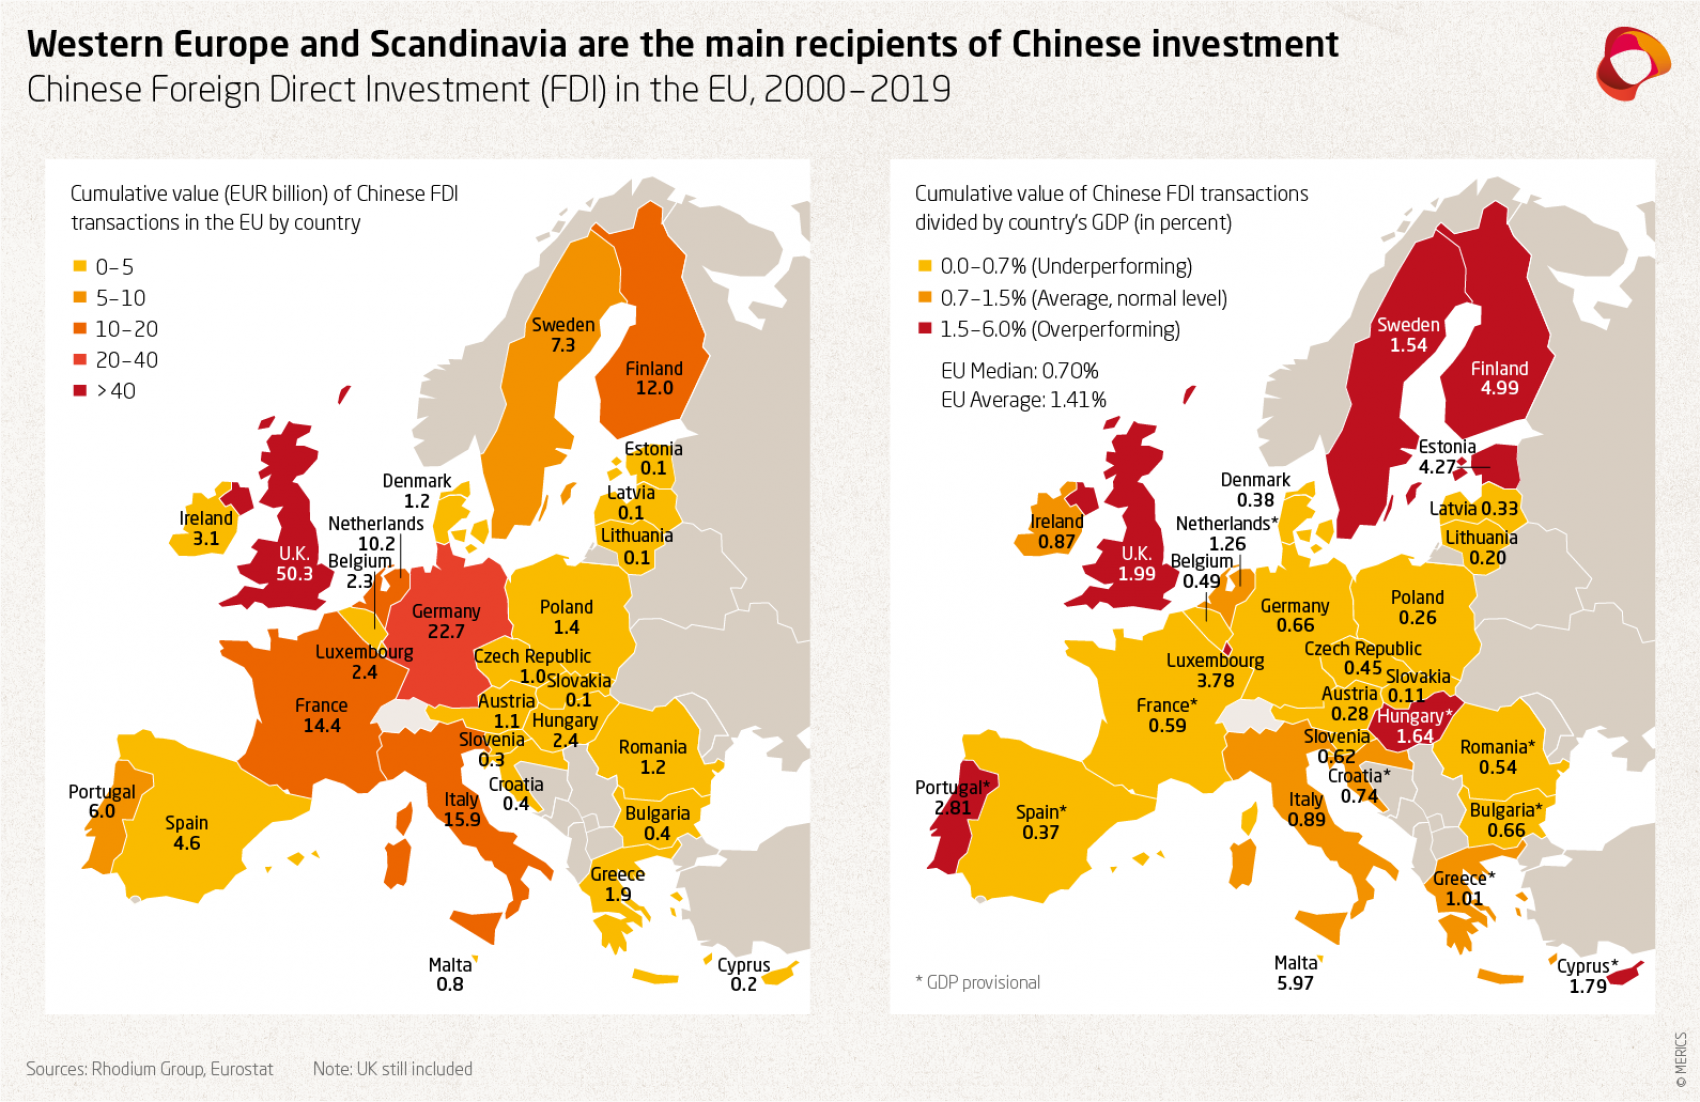 Map showing Chinese Foreign Direct Investment (FDI) in the EU between 2000 and 2019